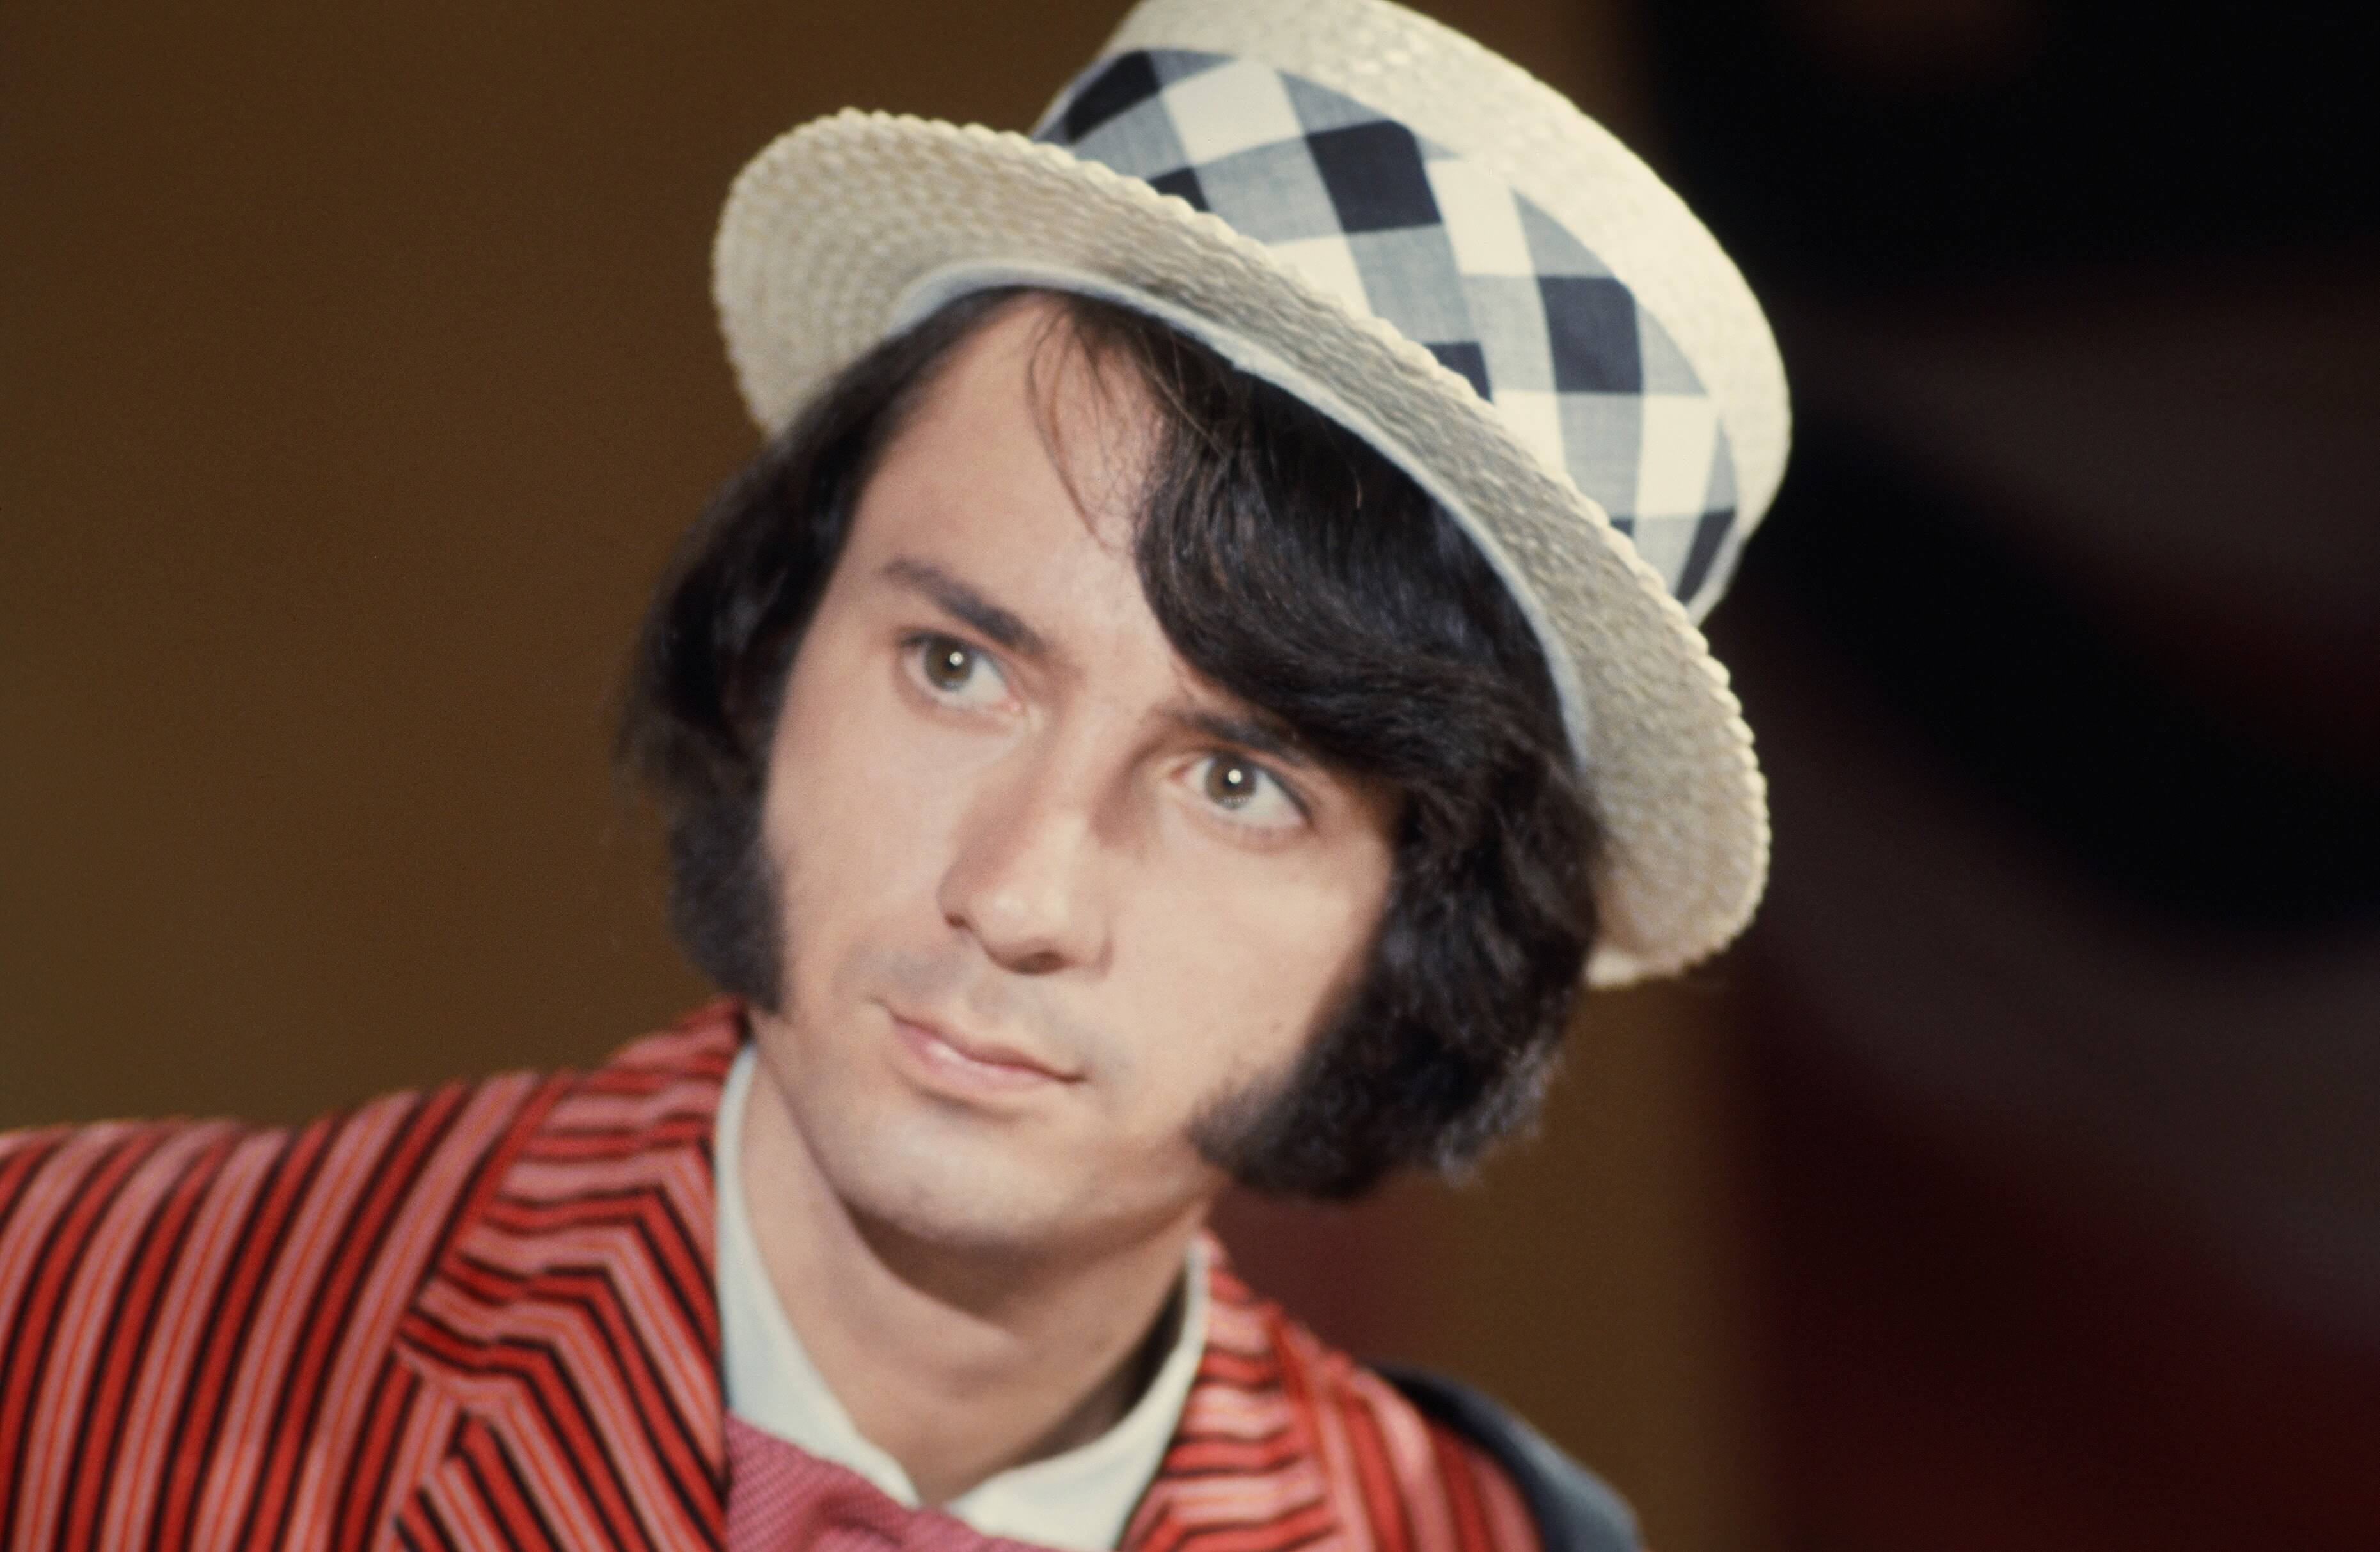 The Monkees' Mike Nesmith in a hat